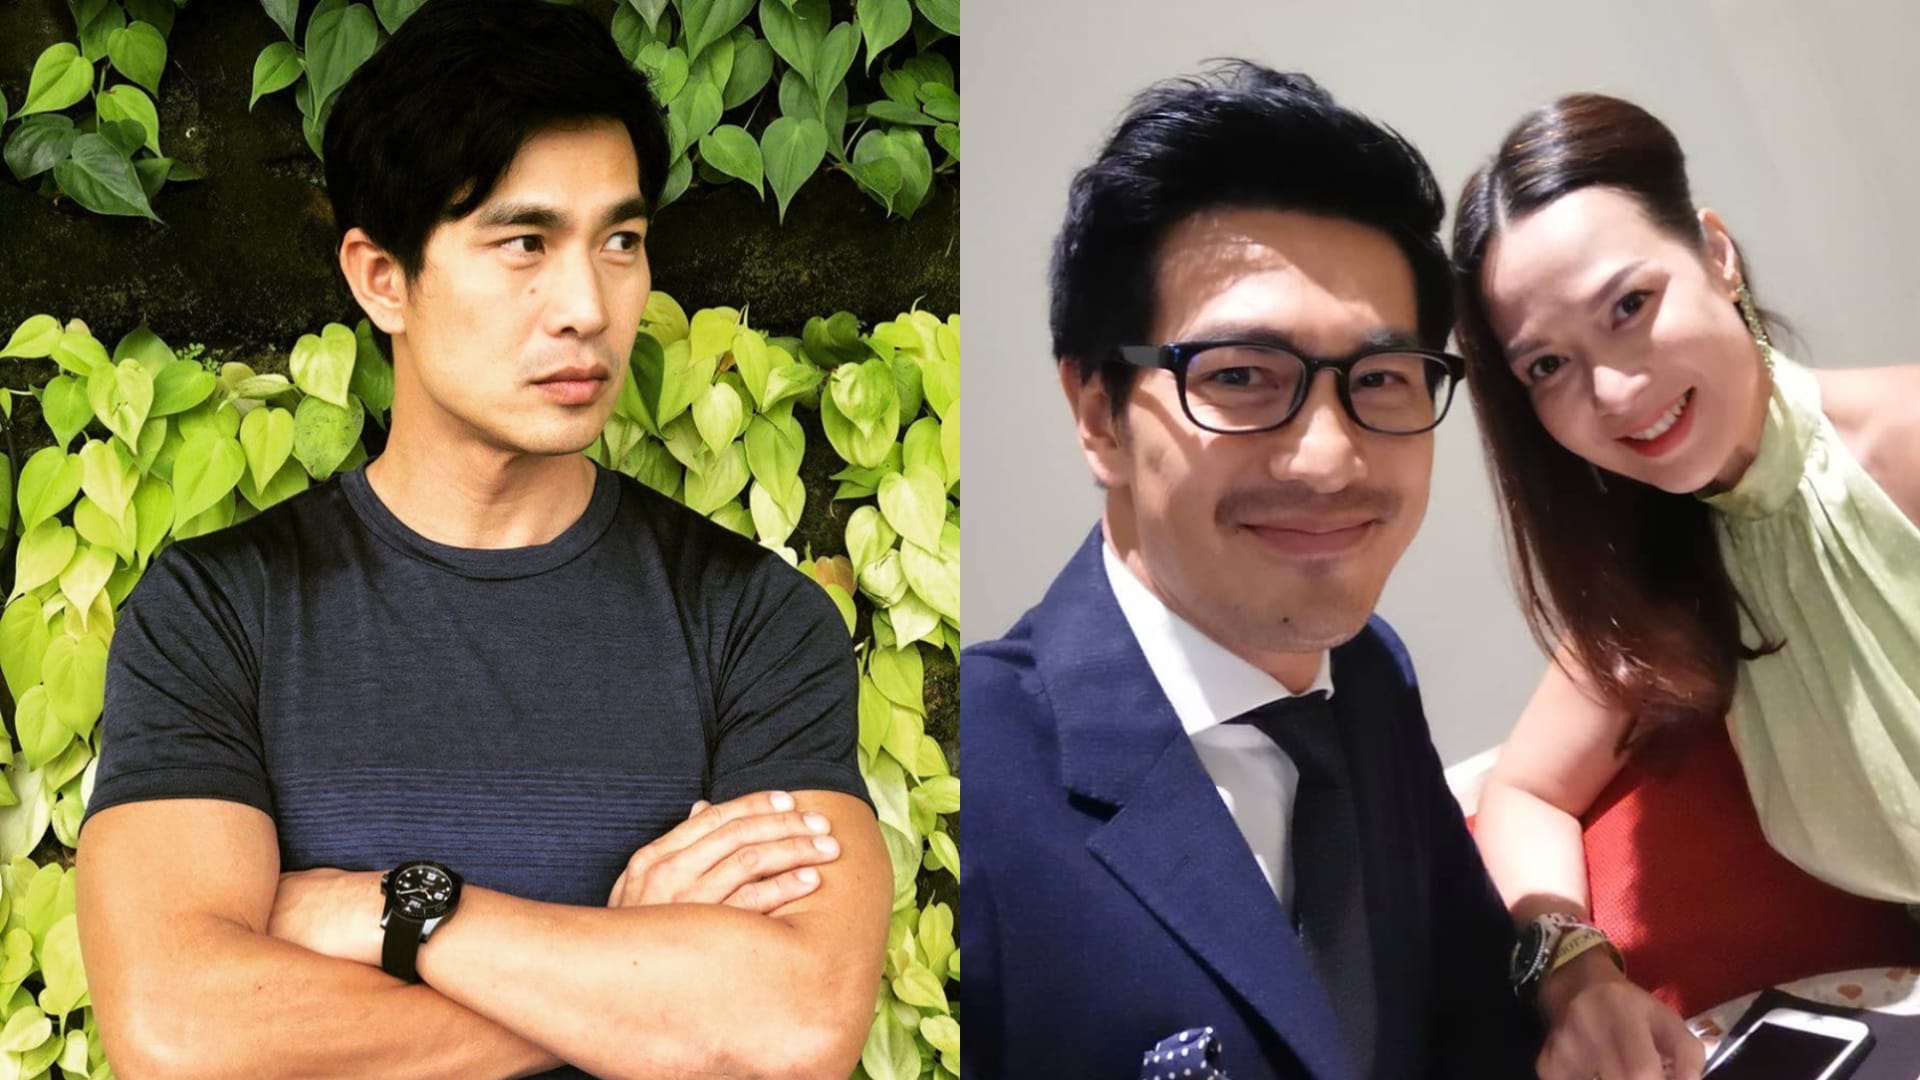 Pierre Png On Why He Got So Mad Seeing People Jog During The Circuit Breaker, And How He Manages To Avoid Fights With His Wife While Staying Home